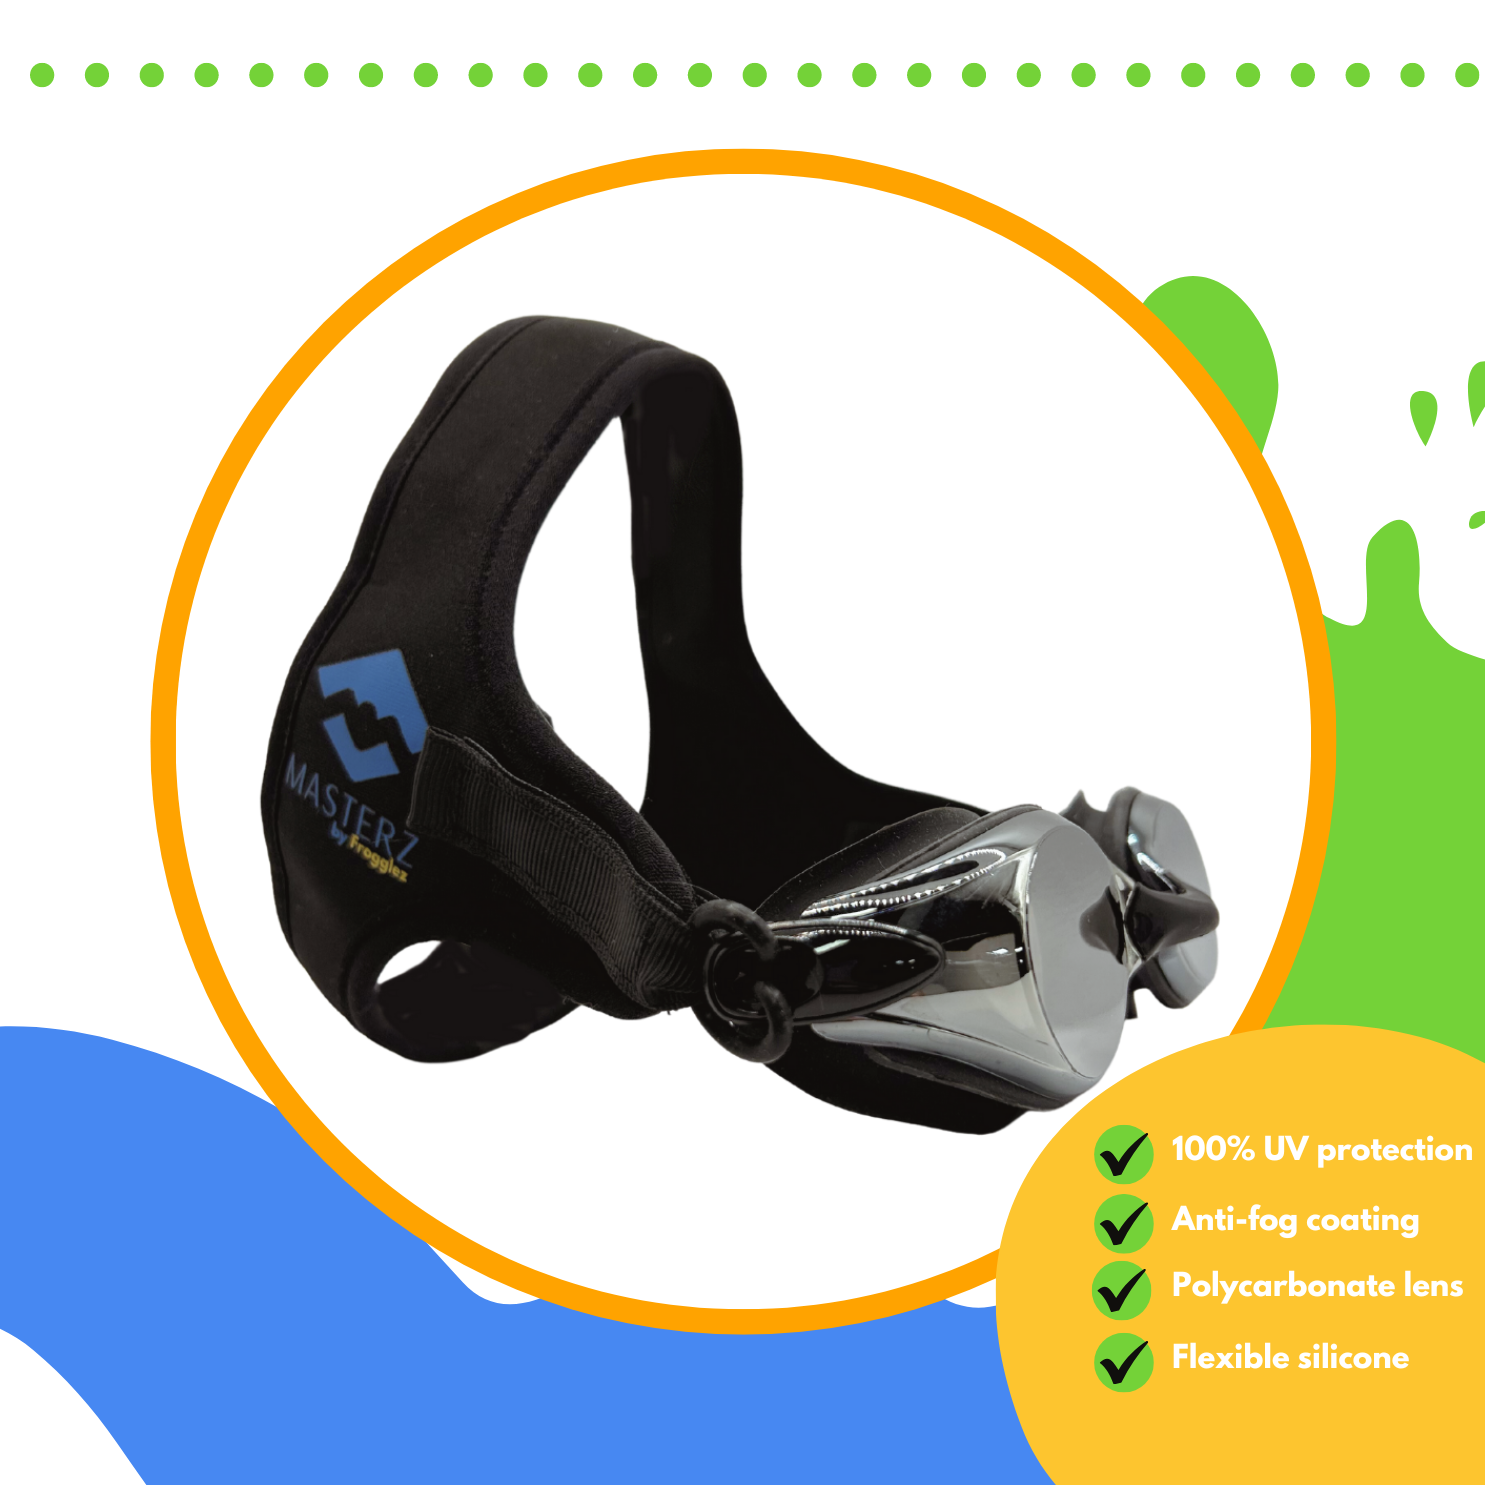 Frogglez Masterz Black Goggles. Text reads 100% UV protection, anti-fog coating, polycarbonate lens, flexible silicone